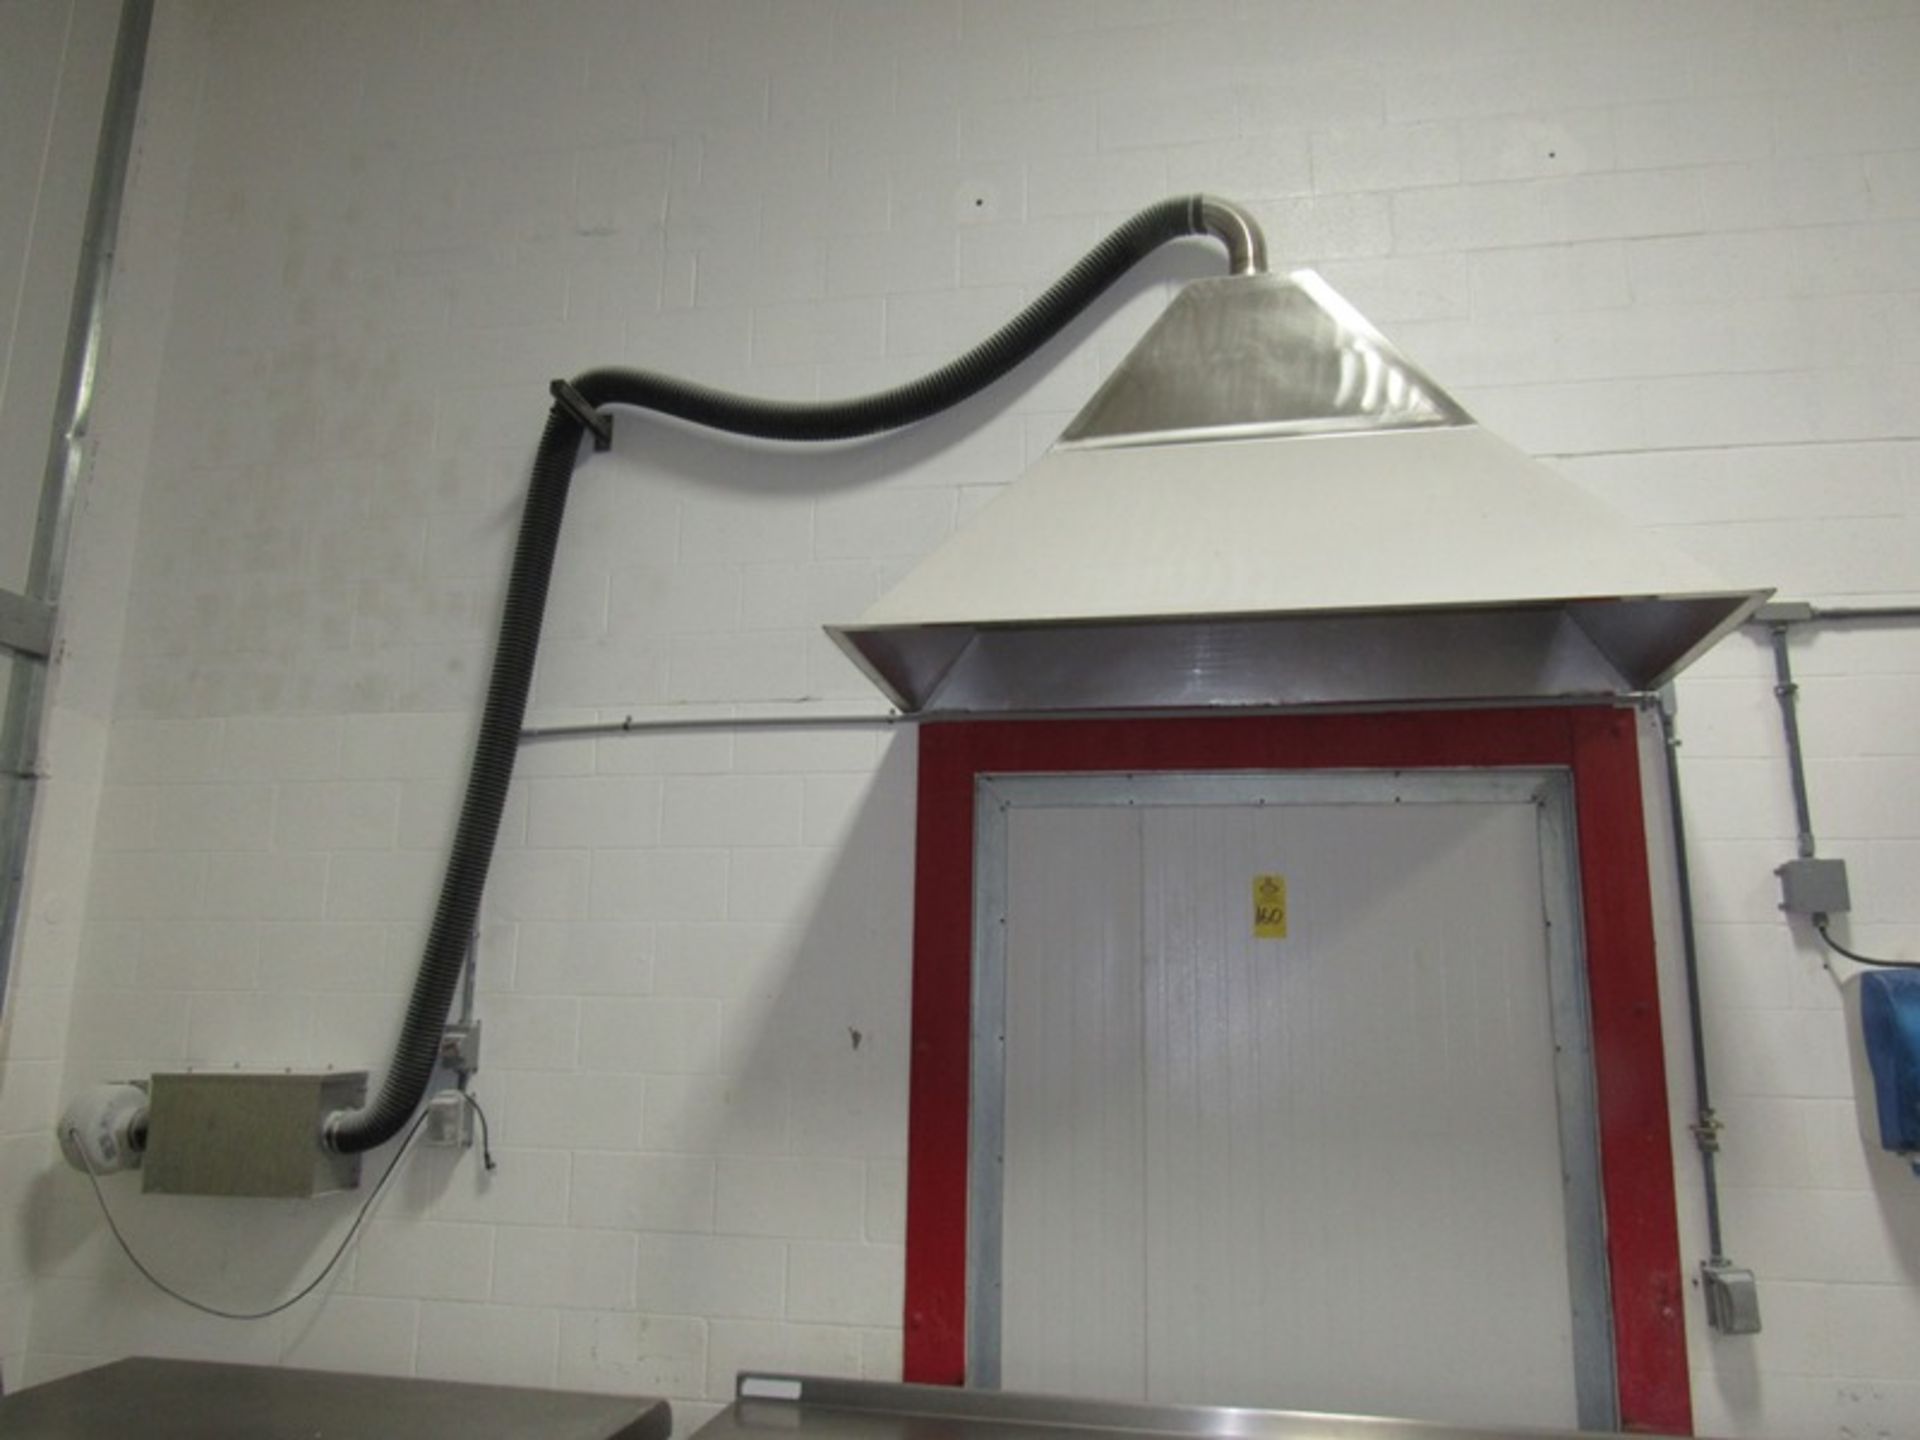 Stainless Steel Exhaust Hood with vacuum motor and hose, 32" W X 72" L X 48" T (Required Loading Fee